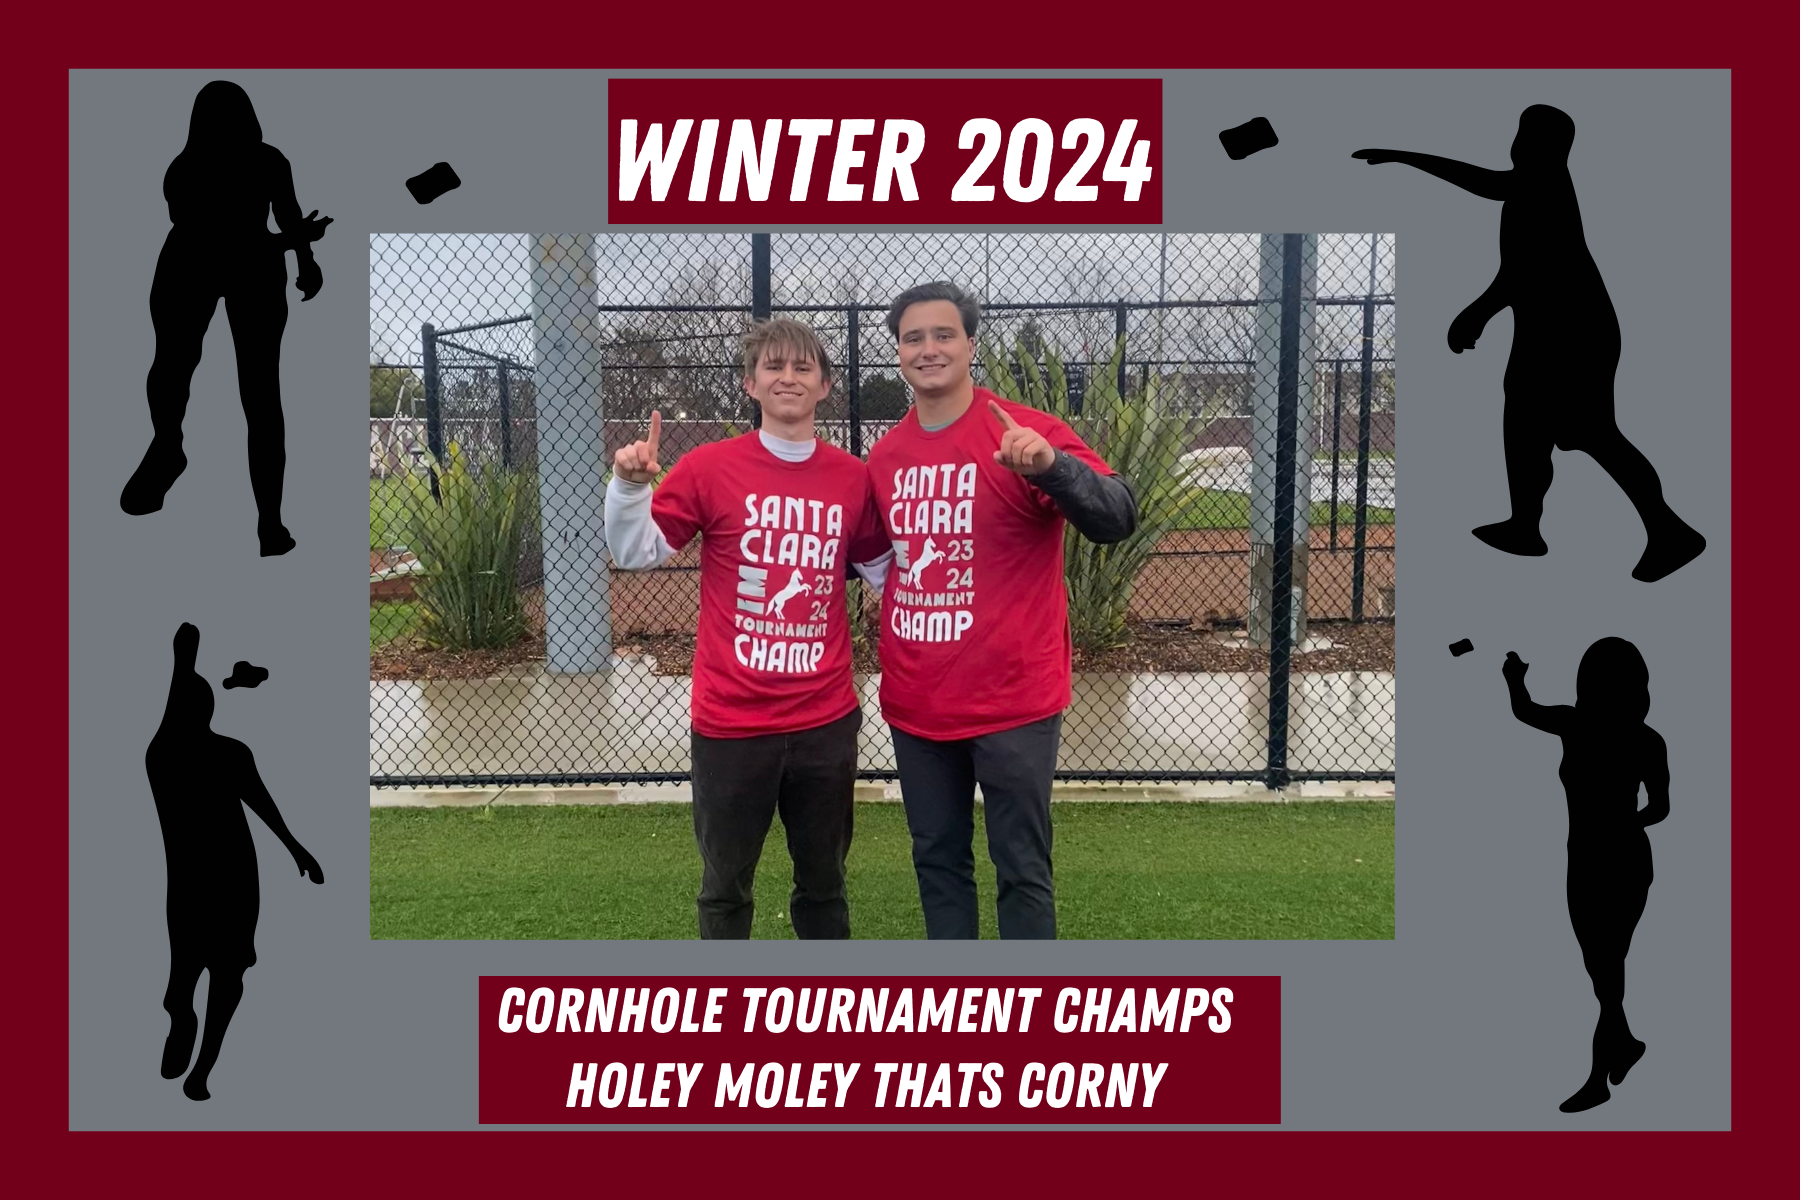 Cornhole tournament champs, Holey Moley, posing in their IM tournament champ t shirts on Bellomy Field.